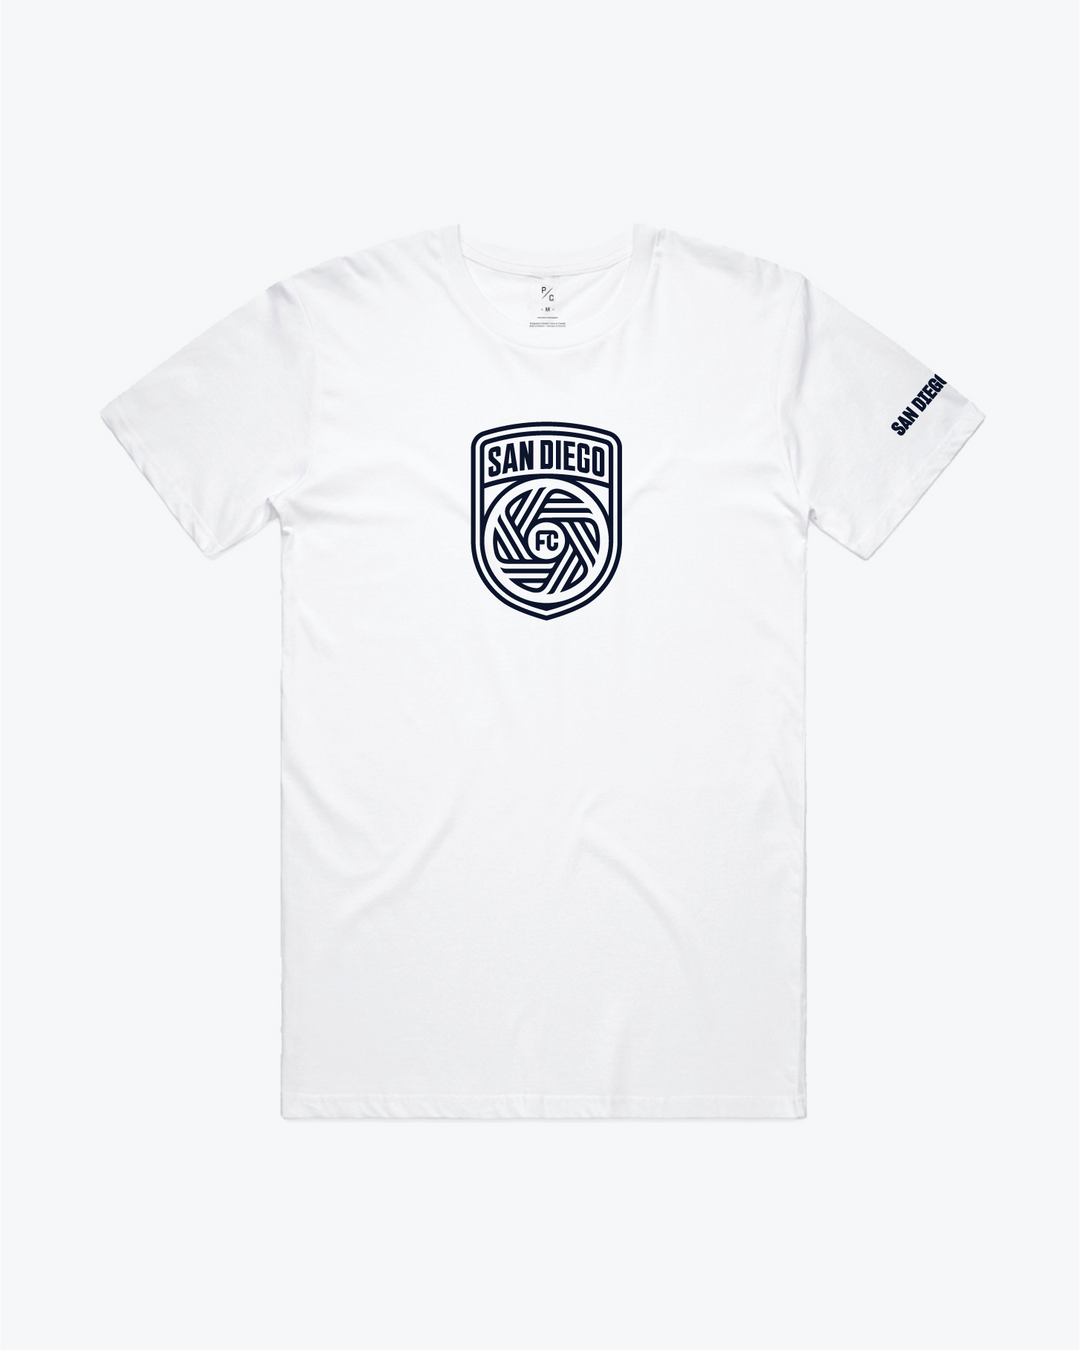 White Tee w/ Crest and SD on the back in Azul